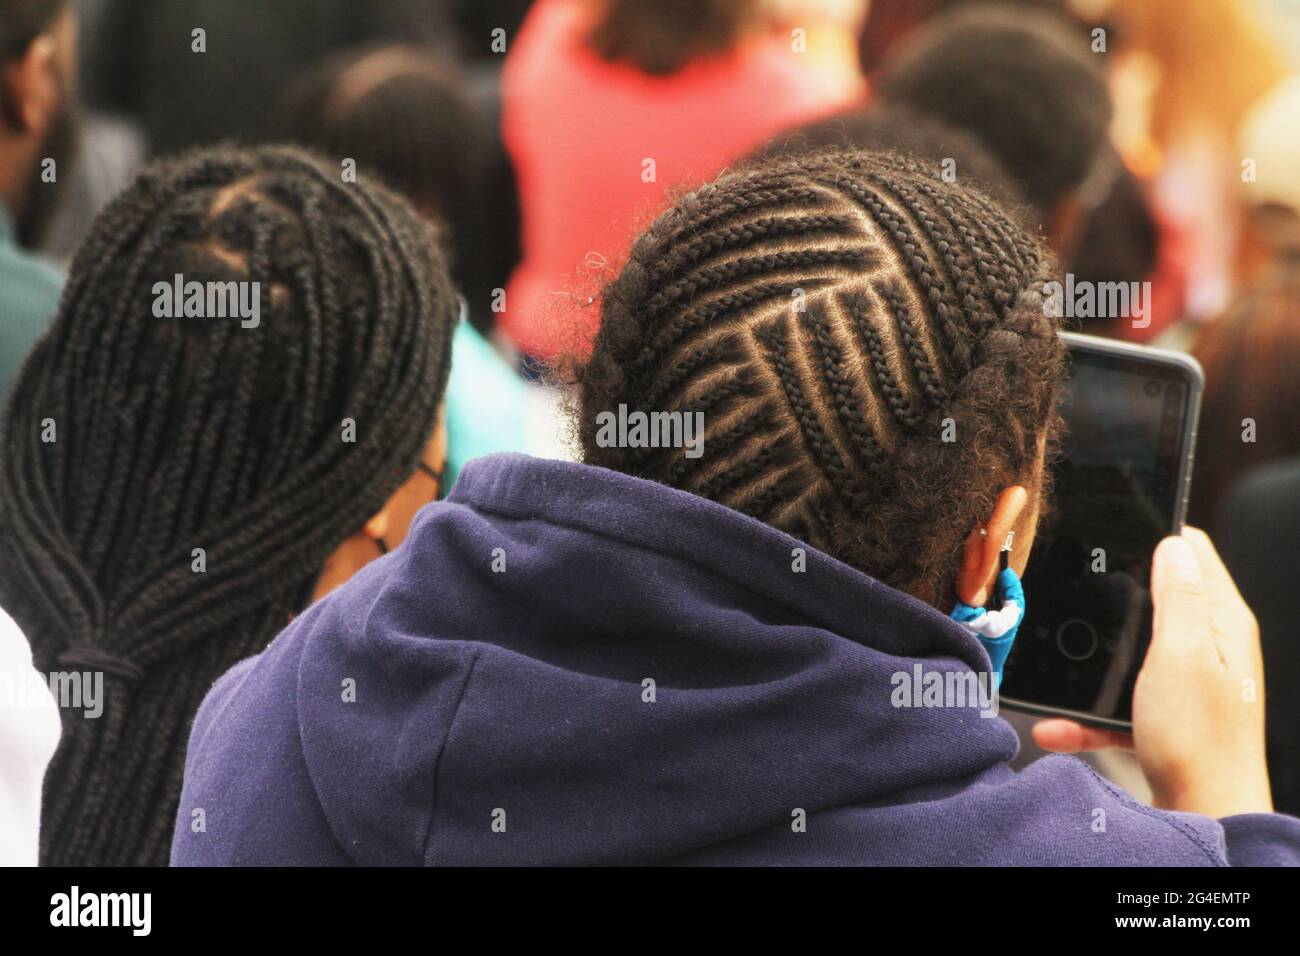 Afro-american people with braided hair Stock Photo